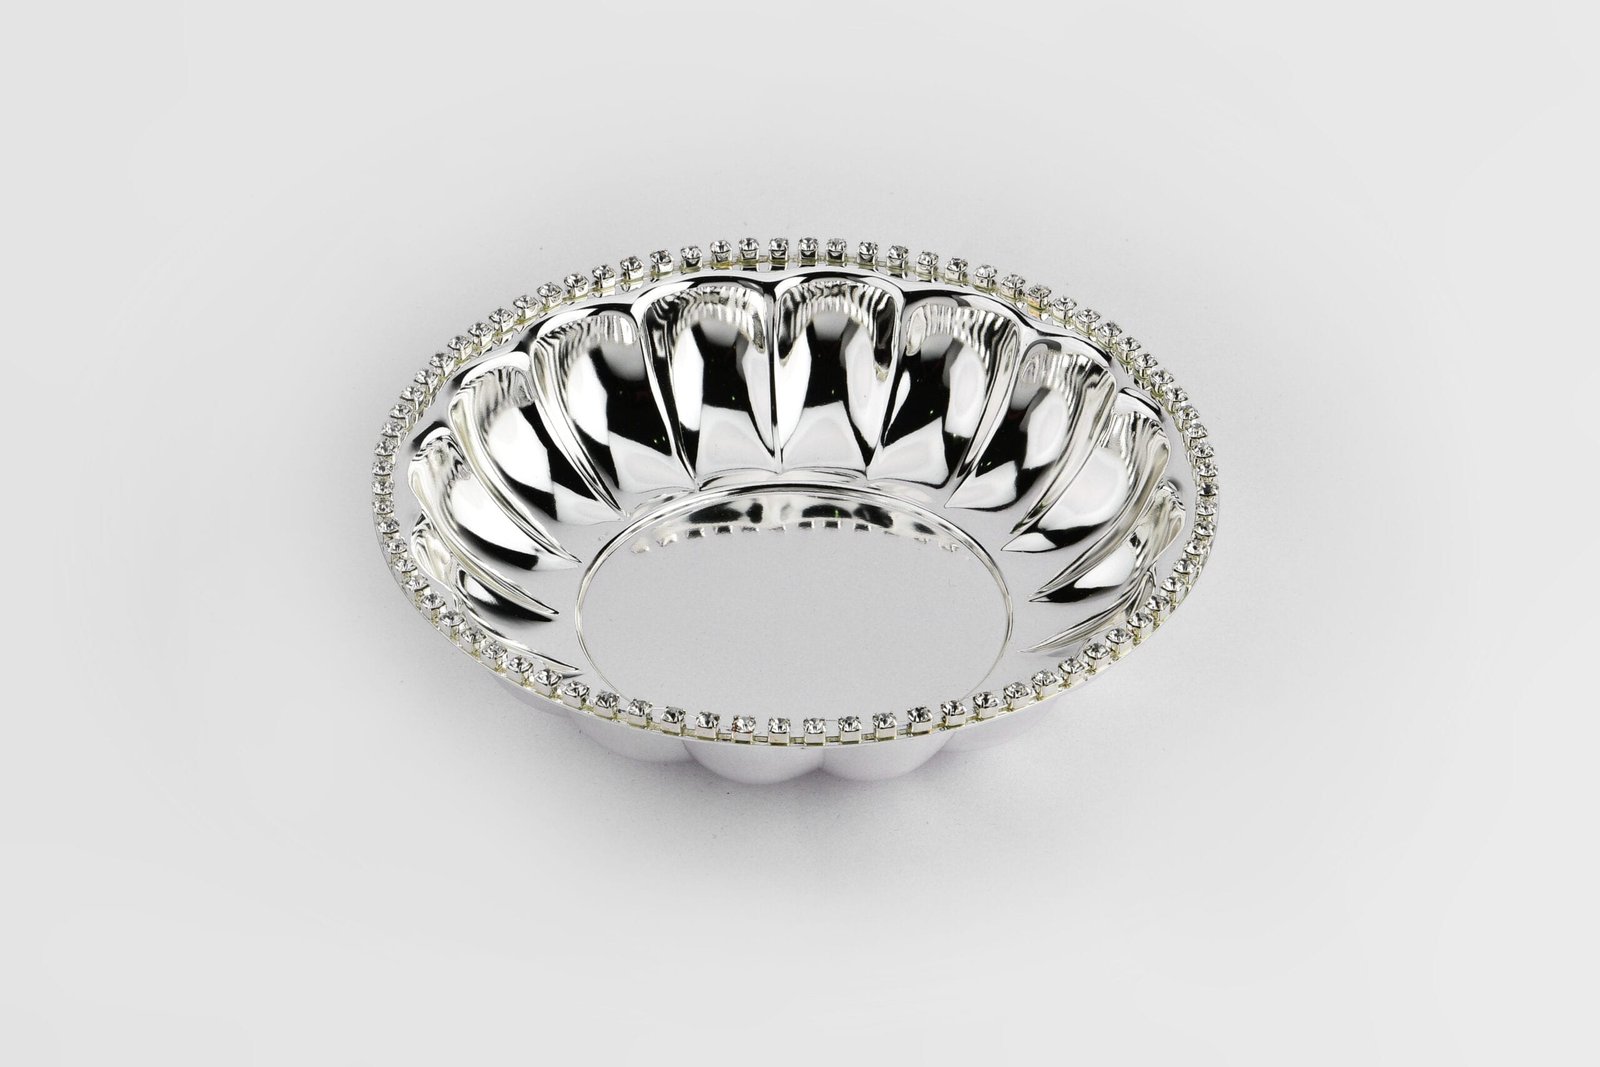 crystal rim Silver Bowl with fluted interior